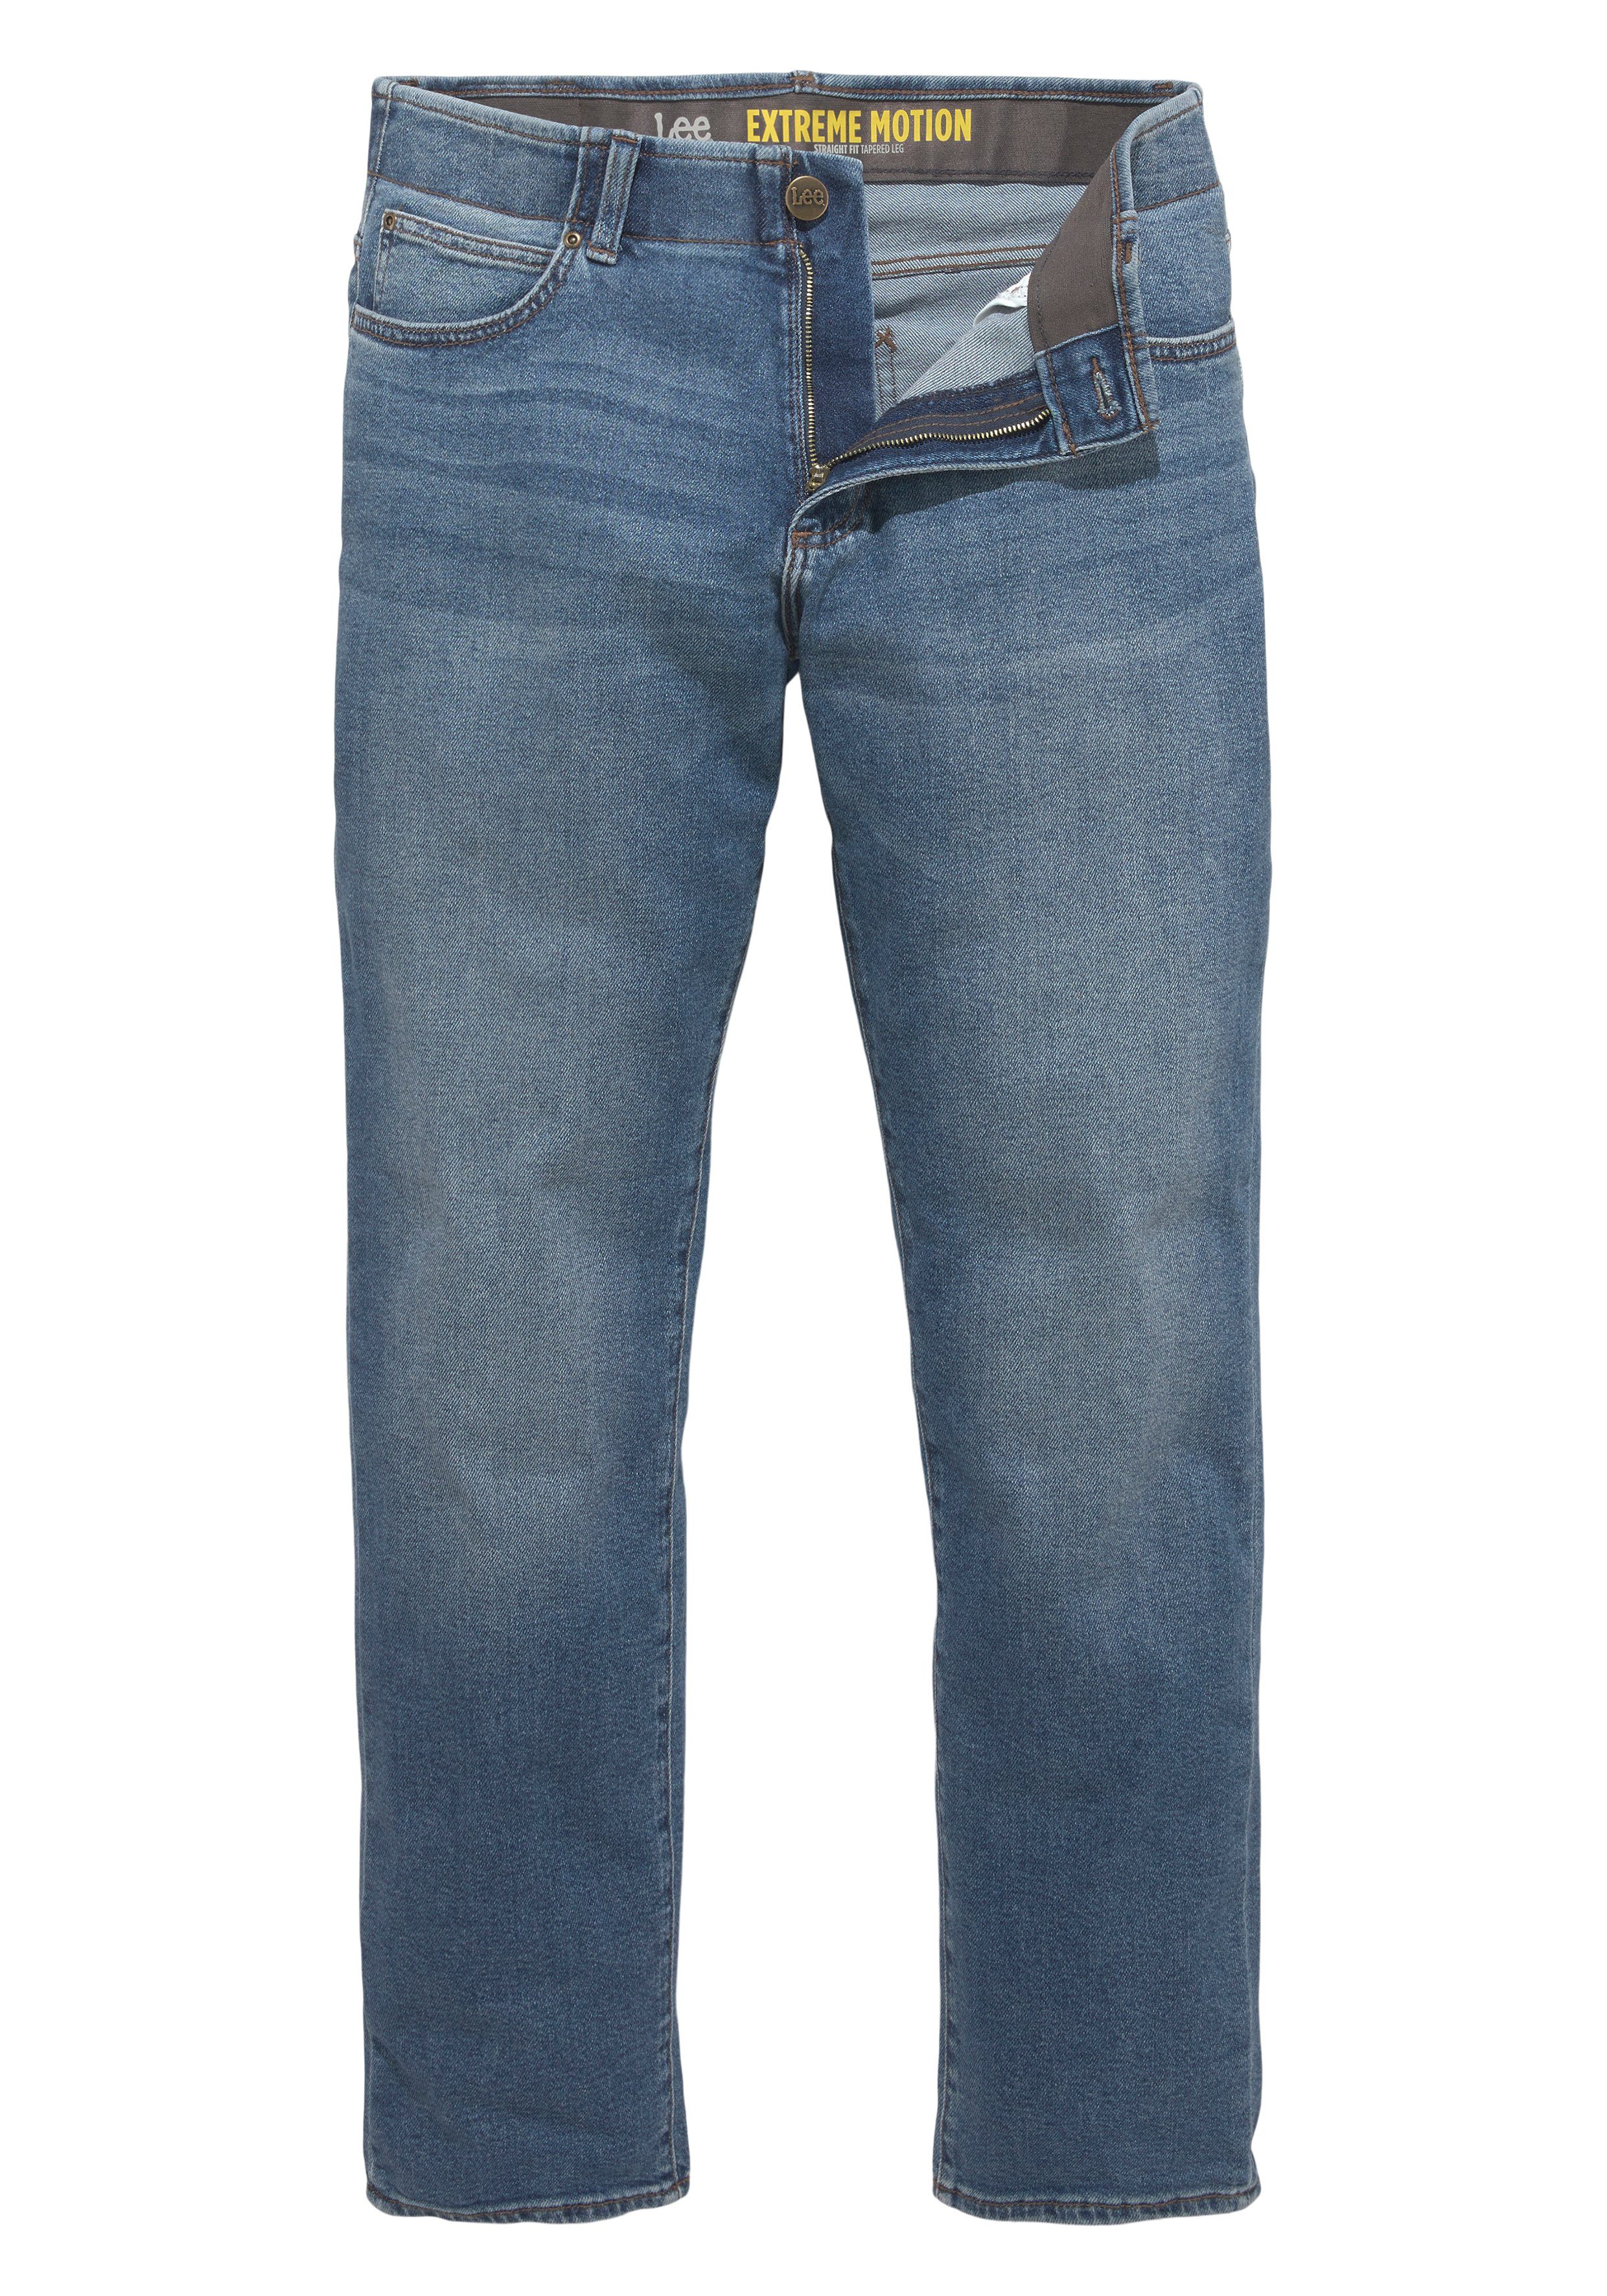 Lee® 5-Pocket-Jeans »Extreme Motion« Straight-Fit-Jeans online kaufen | OTTO